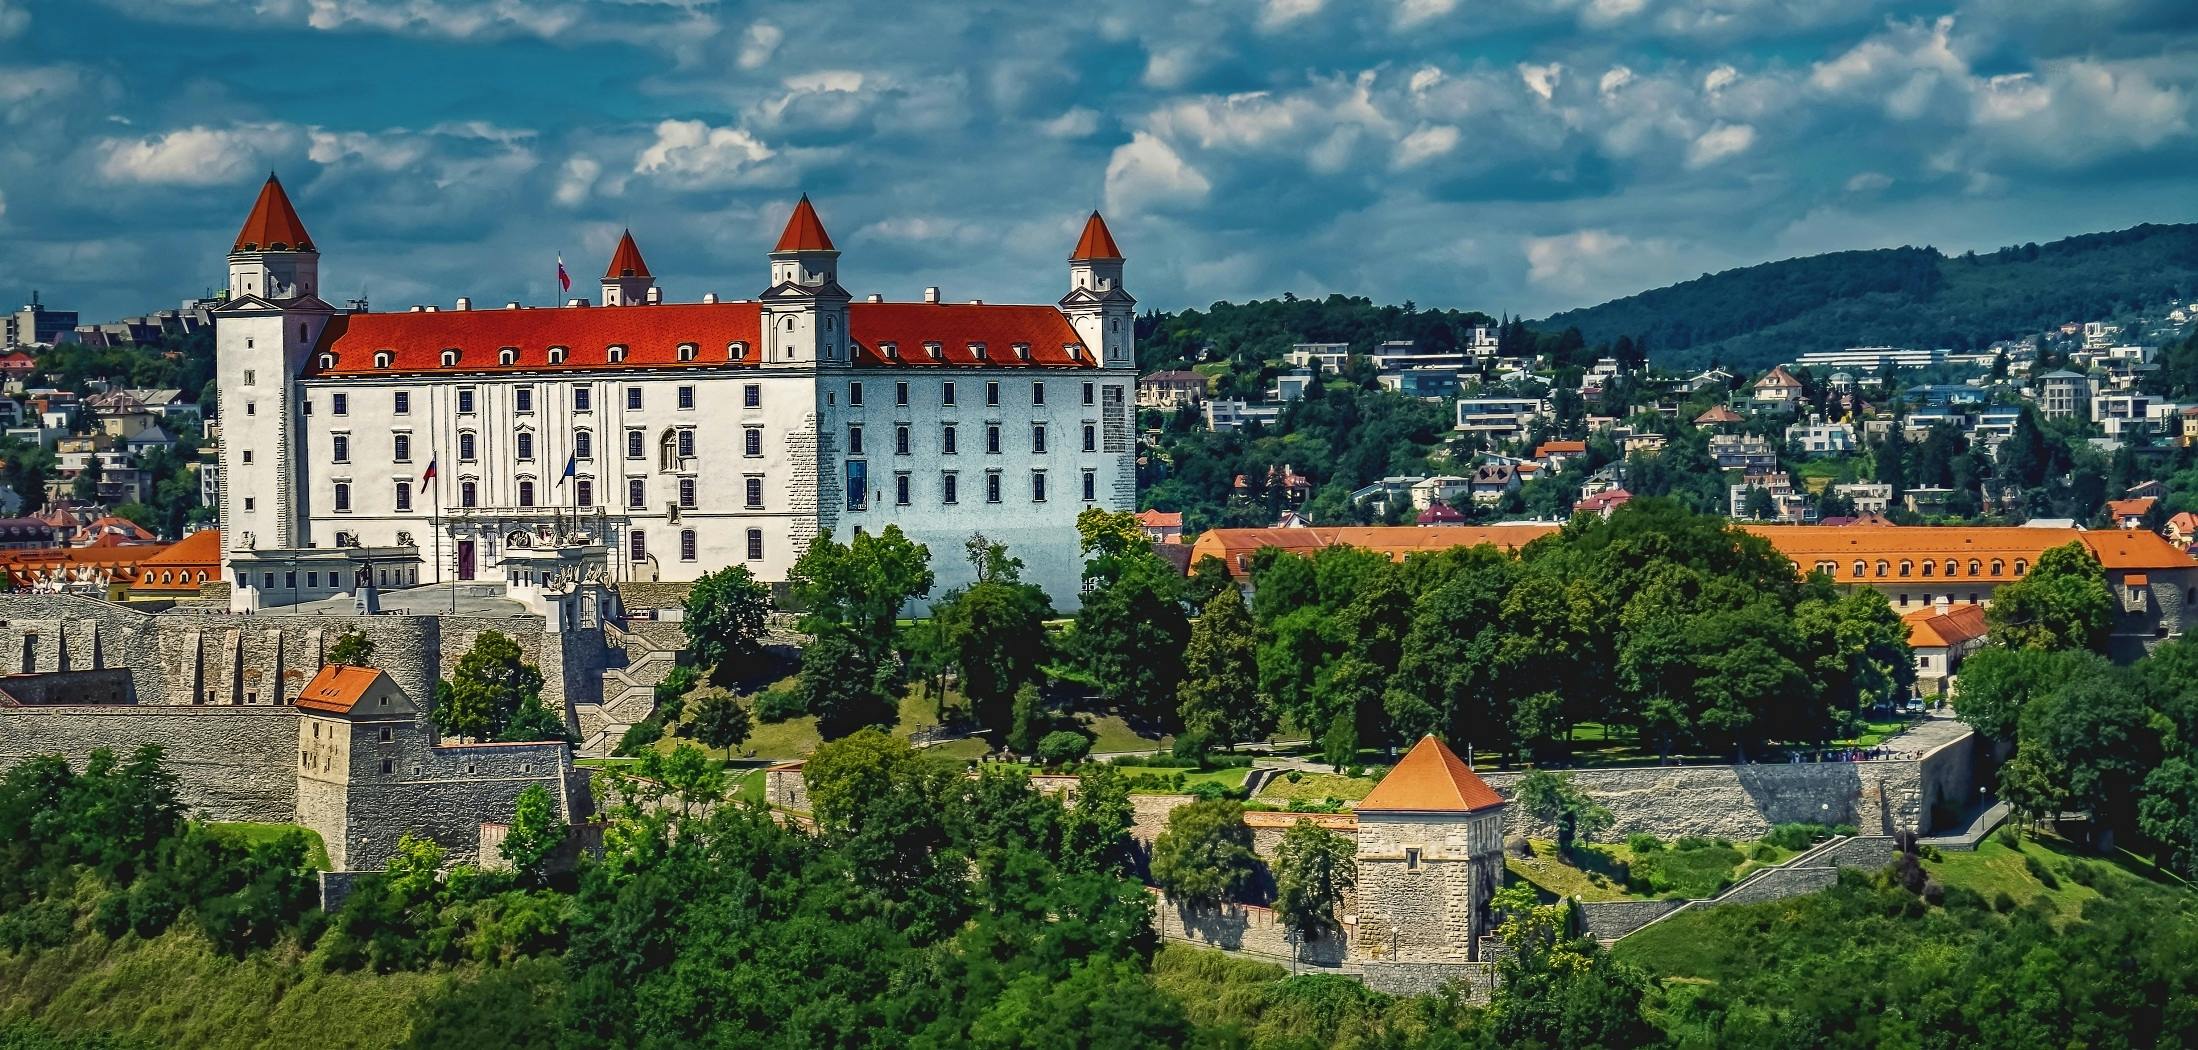 a castle sitting on top of a lush green hillside, white buildings with red roofs, janusz jurek, featured, square